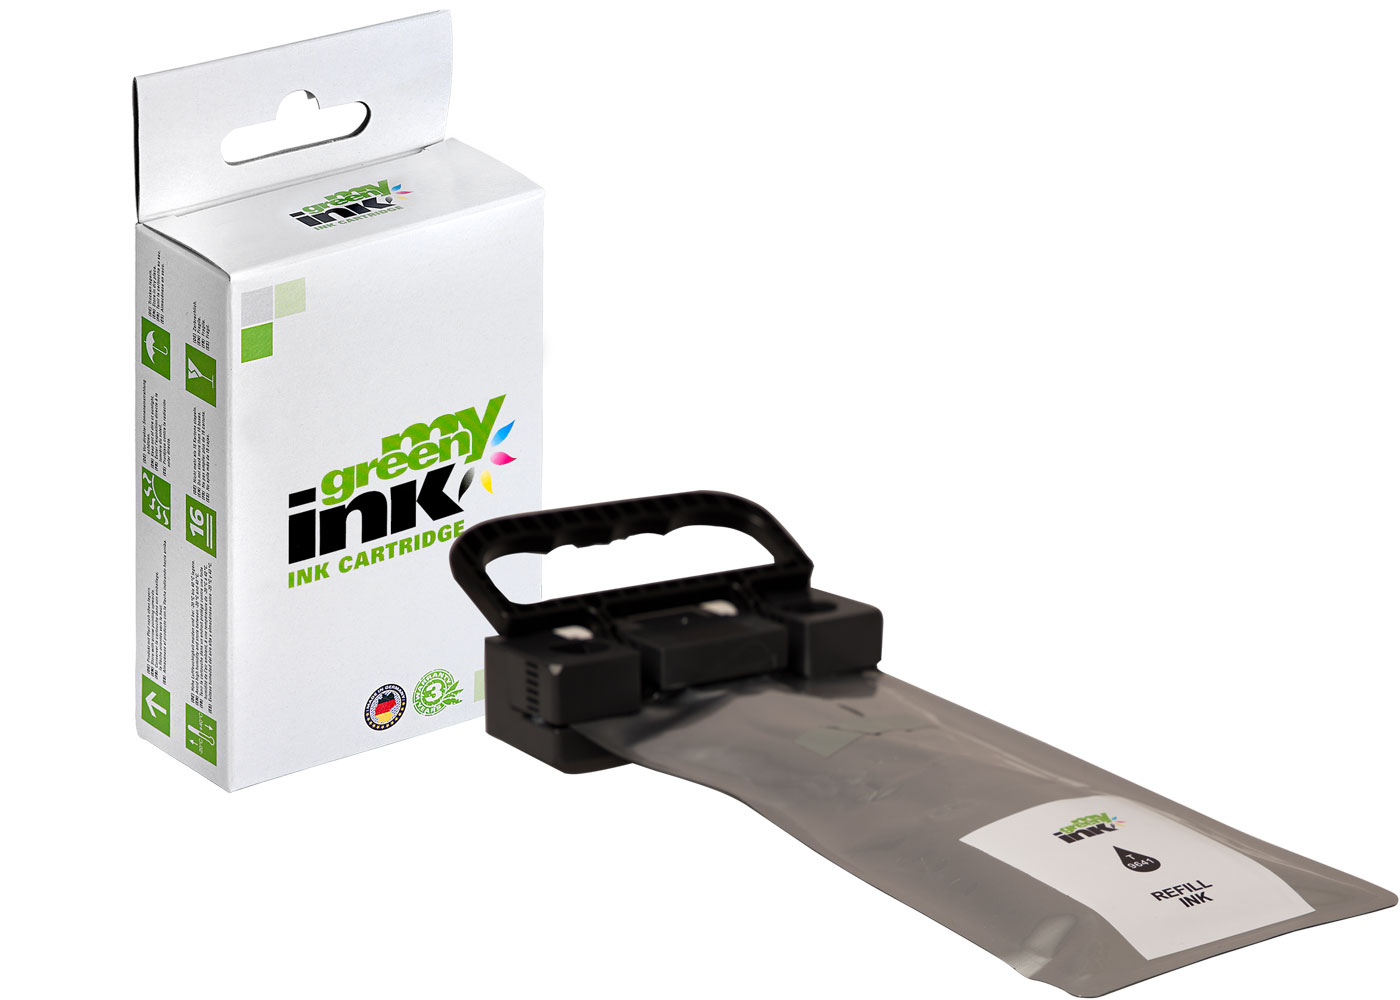 Refill ink cartridge replaces Epson WorkForce Pro WF-M5298 a. o.